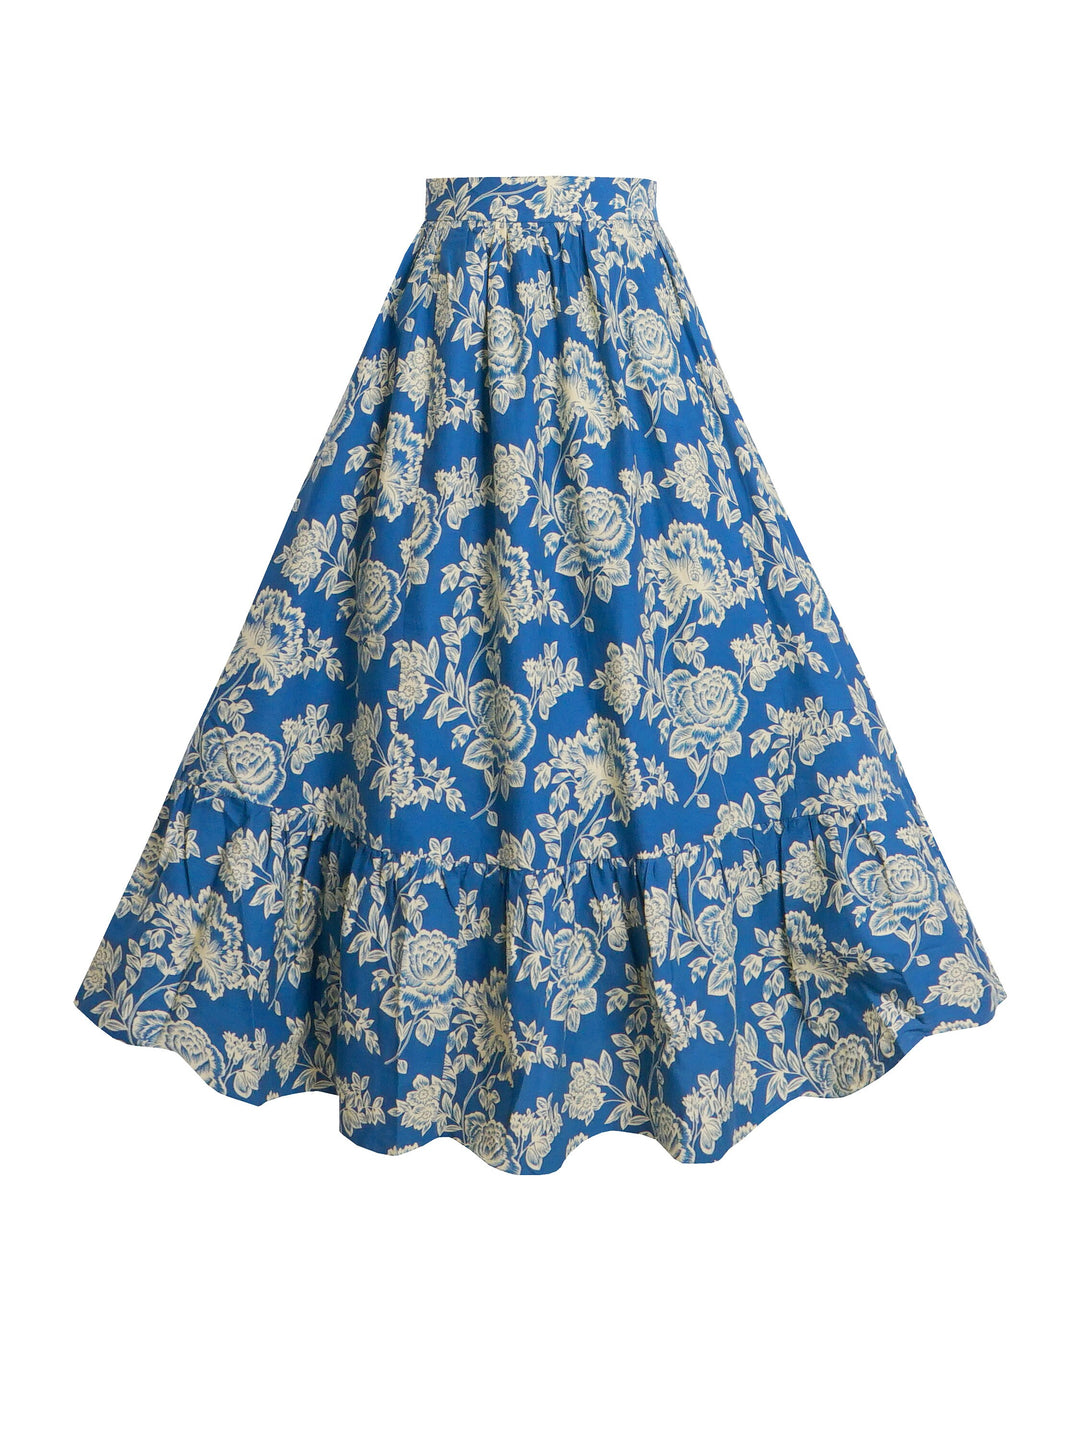 RTS - Size S - Rosita Skirt Blue "Waverly Floral"